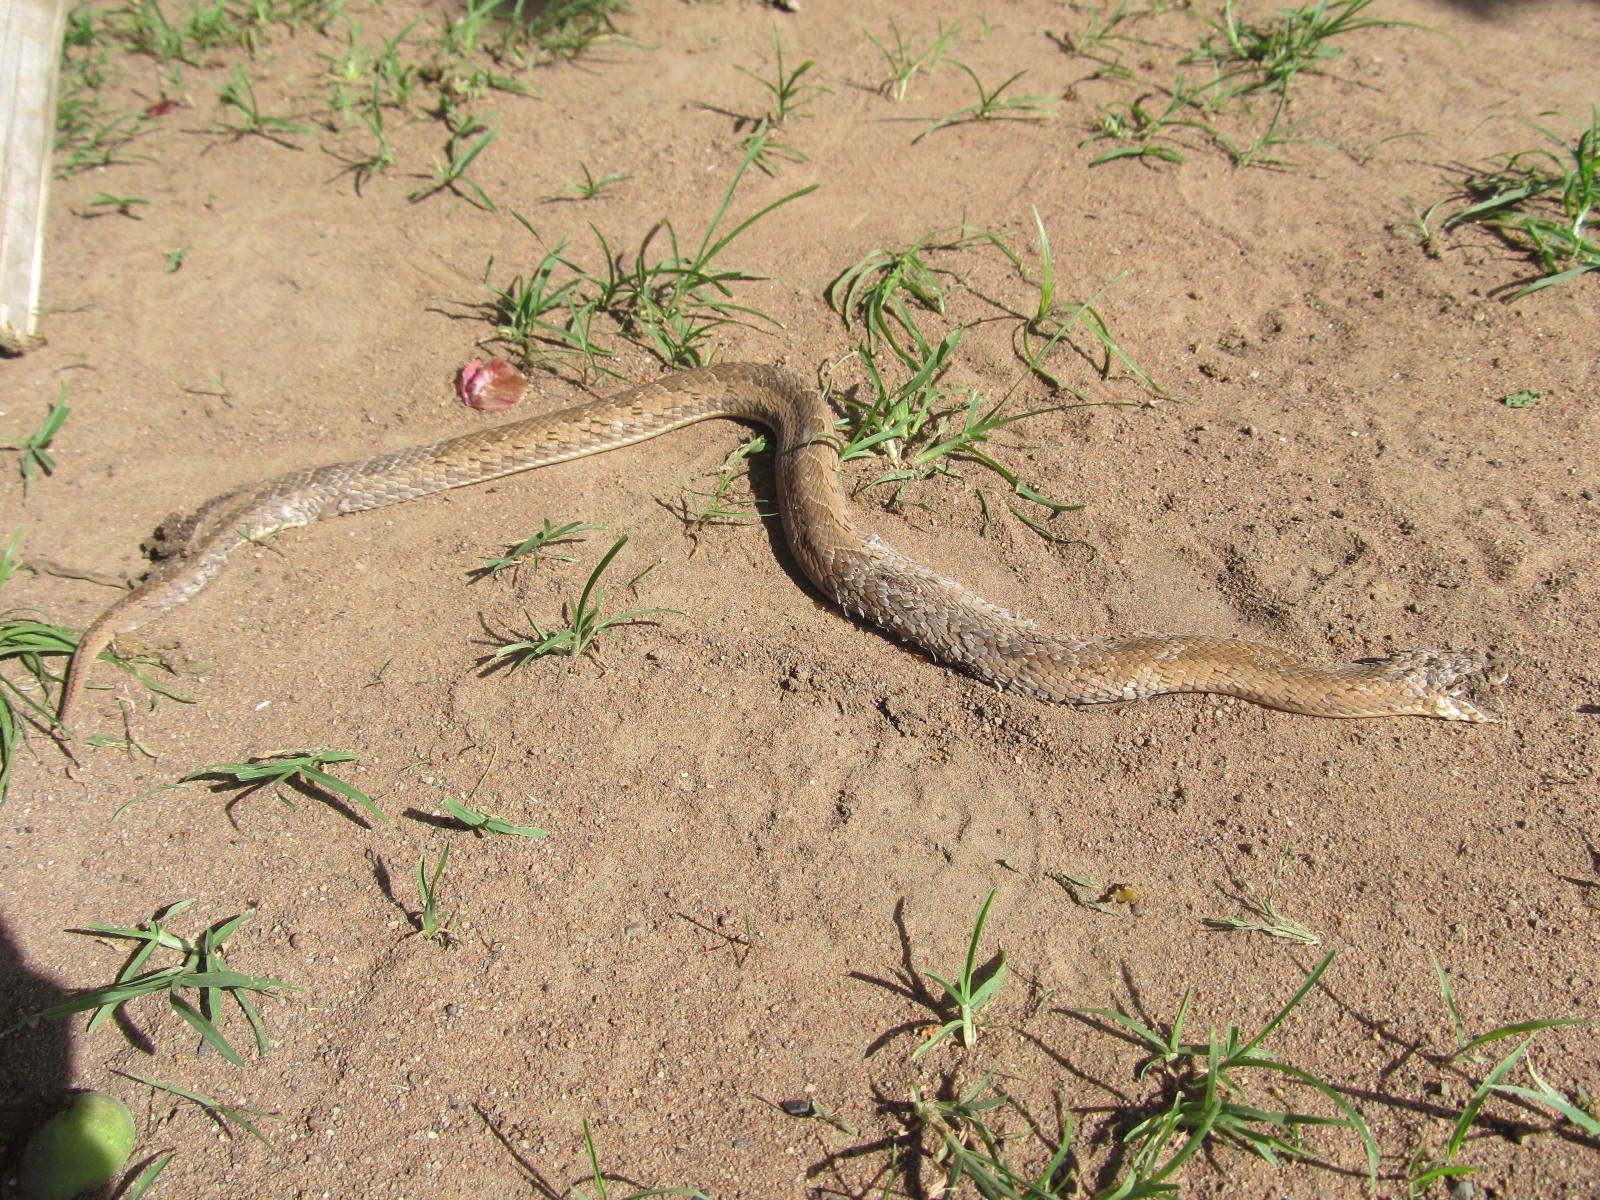 Official reports worrying numbers of snake bites in Mvolo County